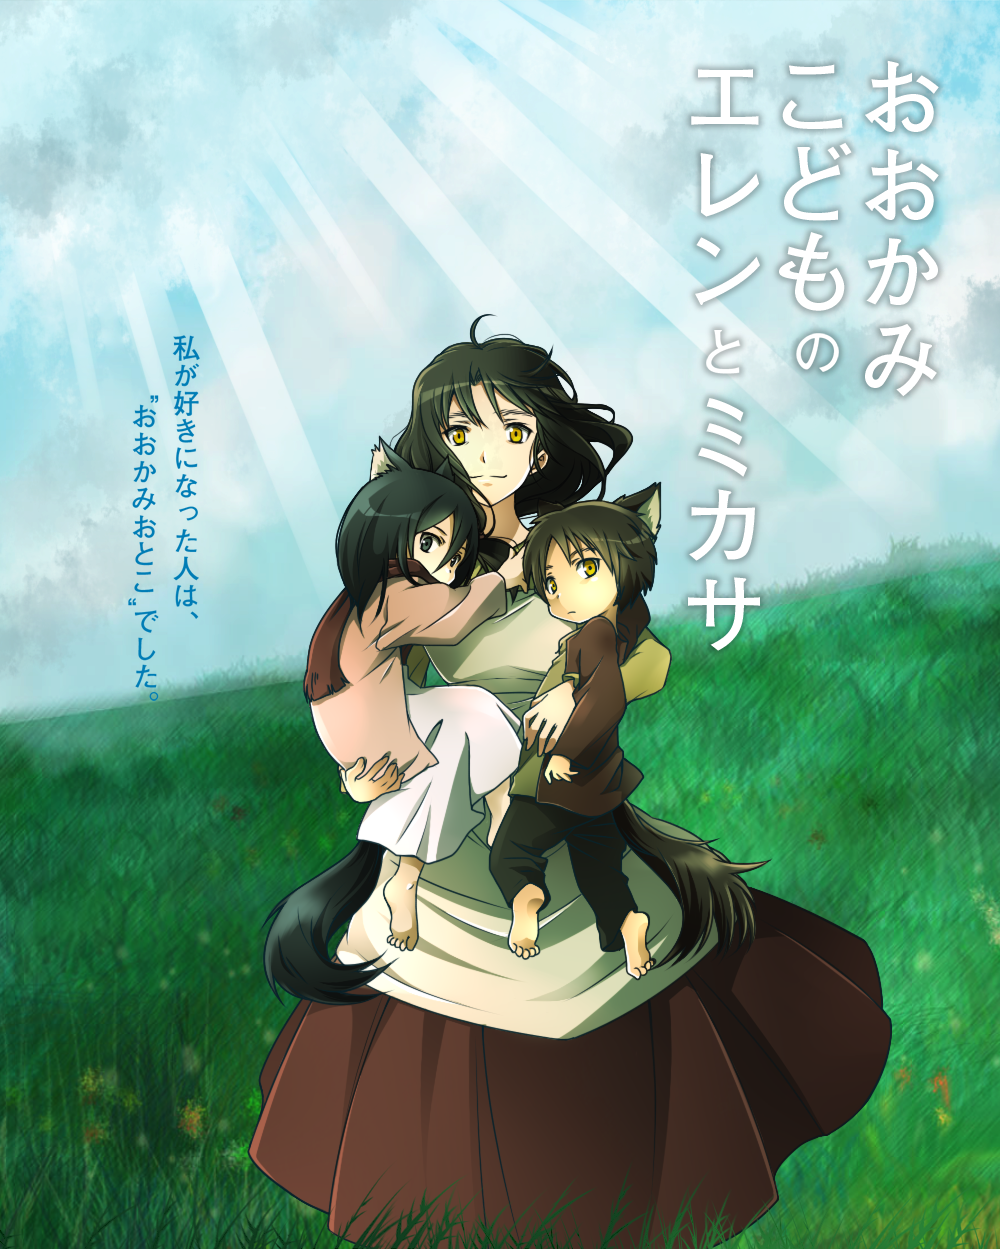 1boy 2girls animal_ears apron black_hair brown_eyes carla_yeager carrying carrying_person crossover eren_yeager highres long_hair mie_(pome_no_ki) mikasa_ackerman mother_and_daughter mother_and_son multiple_girls ookami_kodomo_no_ame_to_yuki shingeki_no_kyojin short_hair smile tail wolf_ears wolf_tail yellow_eyes